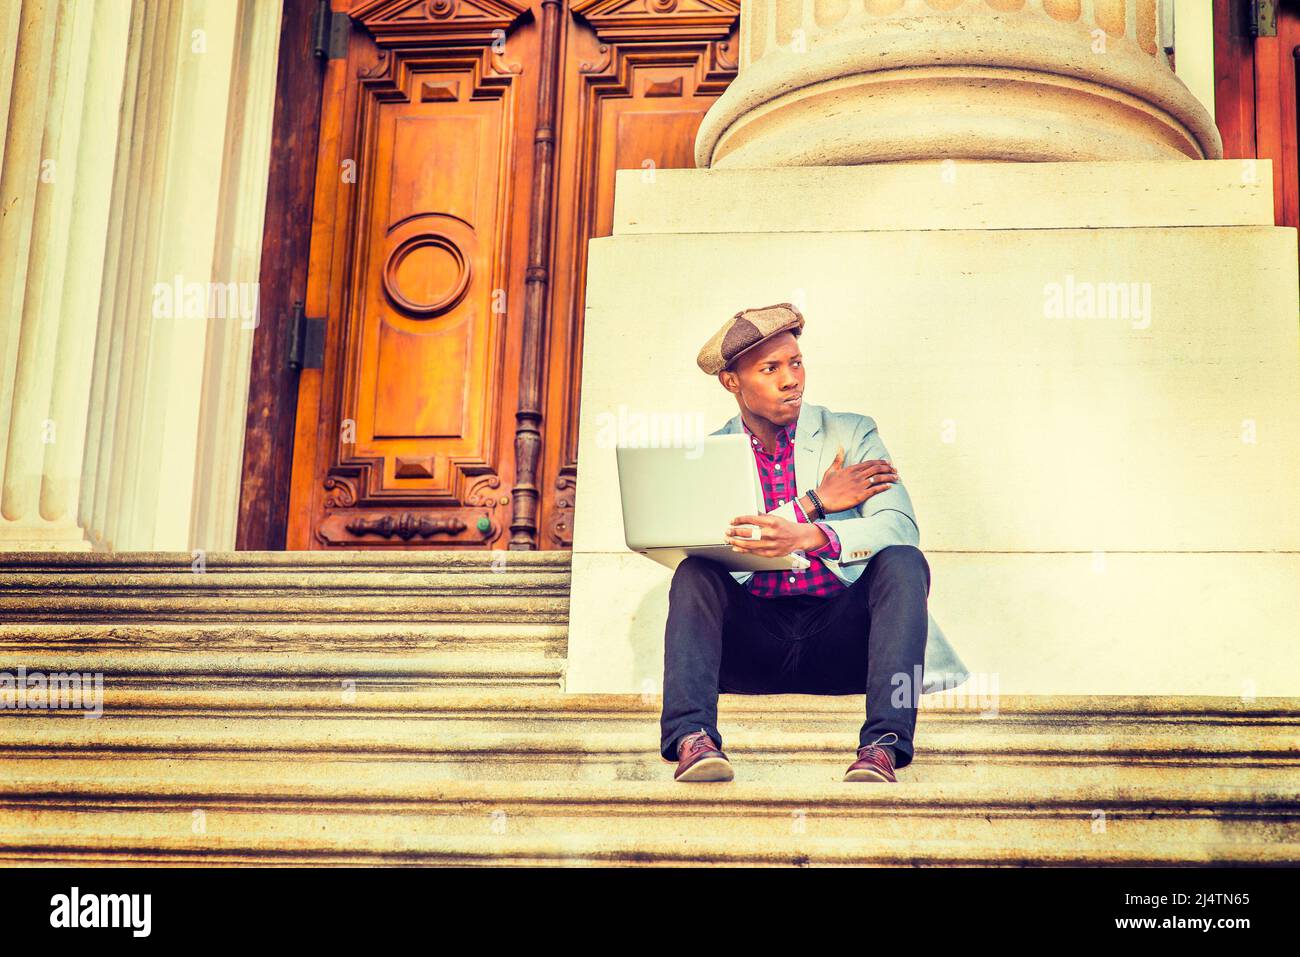 Man Working Outside. Wearing a Newsboy cap, dressing in light gray blazer, black pants, brown leather shoes, a young guy is sitting on stairs outside Stock Photo